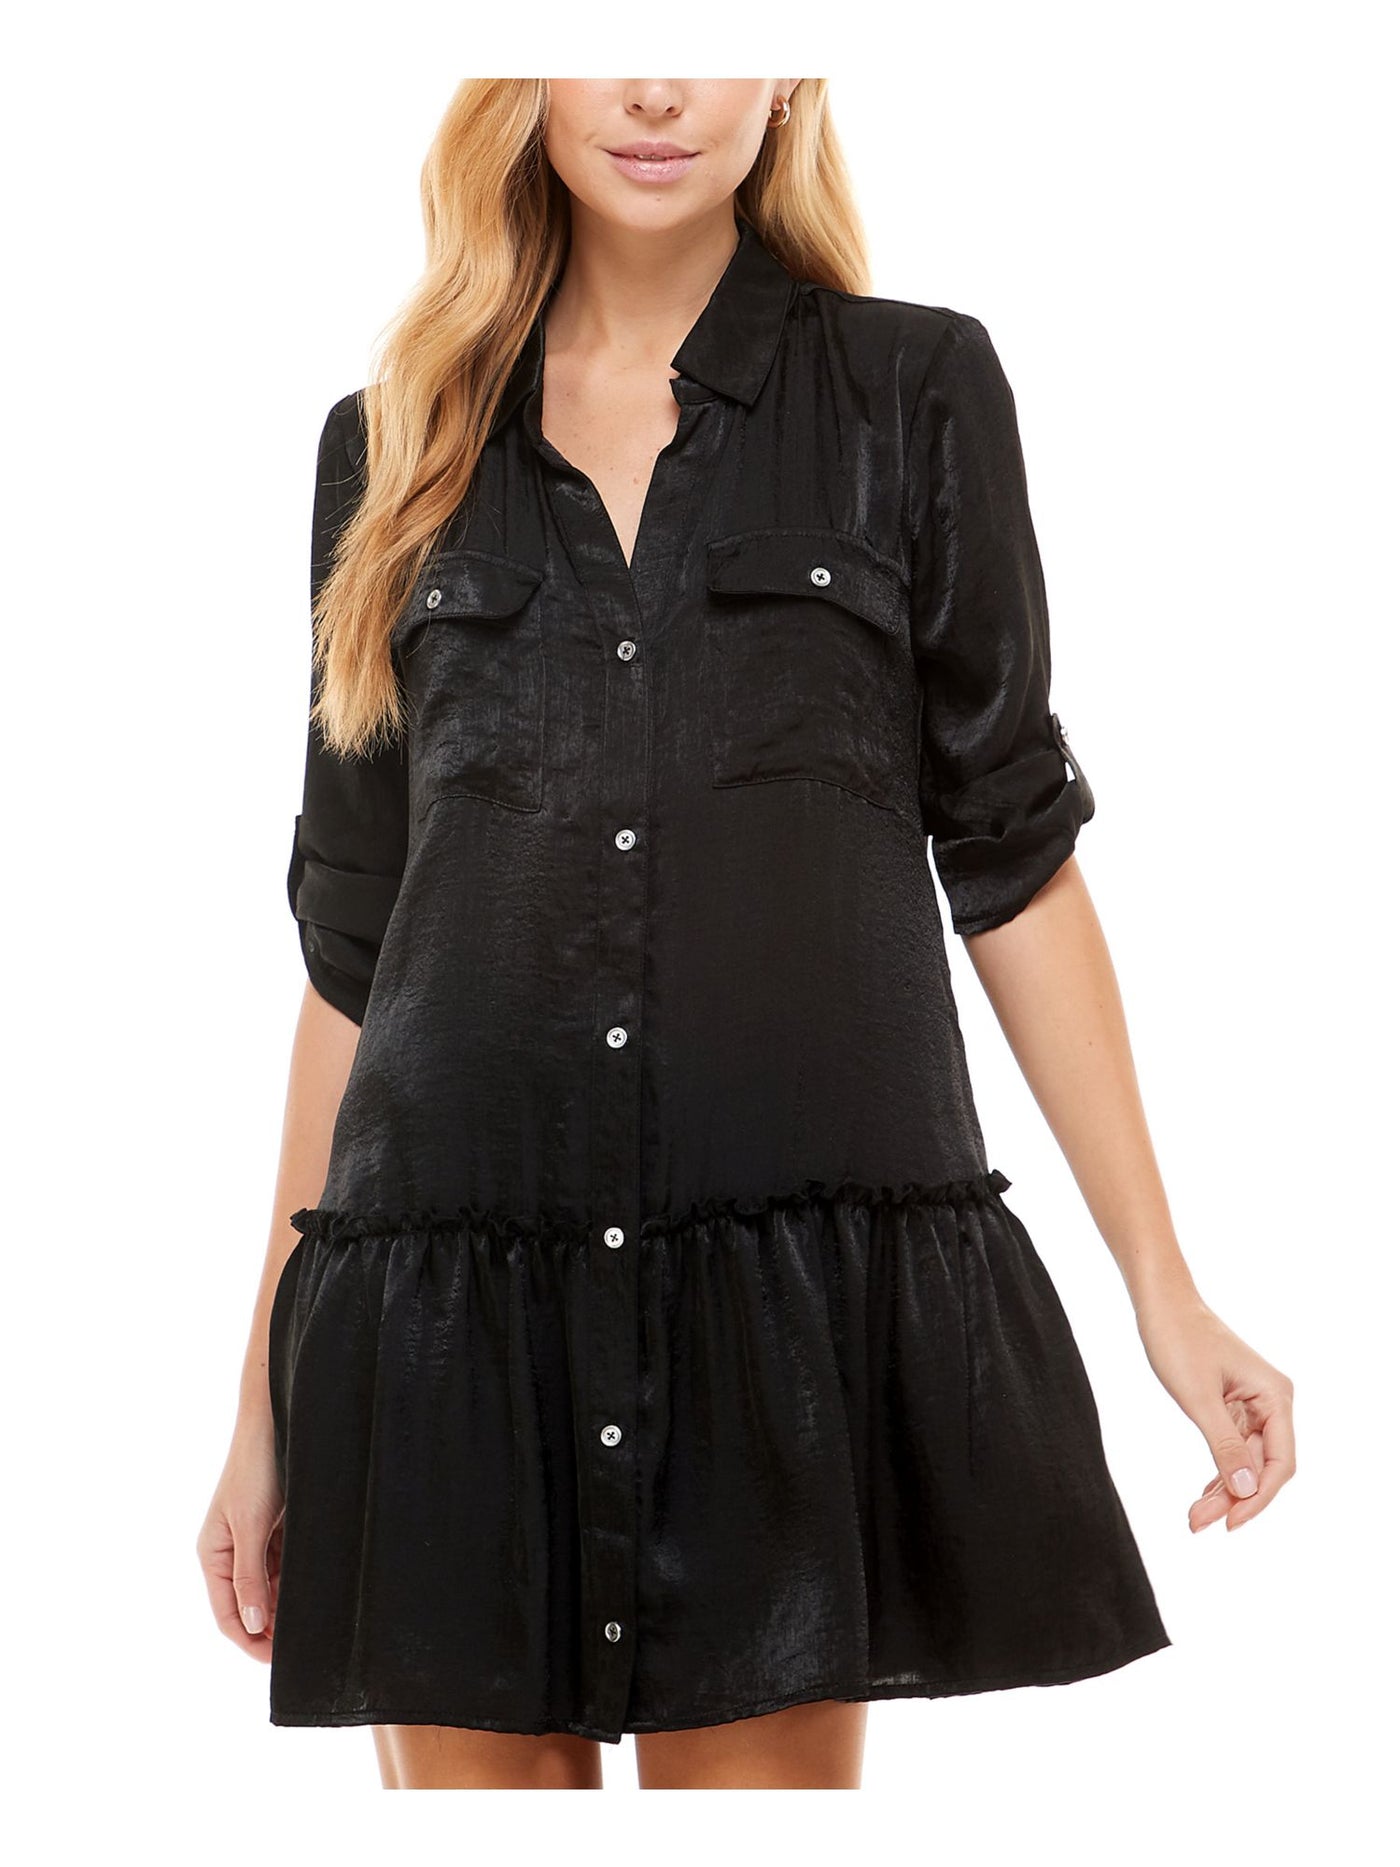 KINGSTON GREY Womens Ruffled Pocketed Button Front Roll-tab Sleeve Collared Mini Shirt Dress